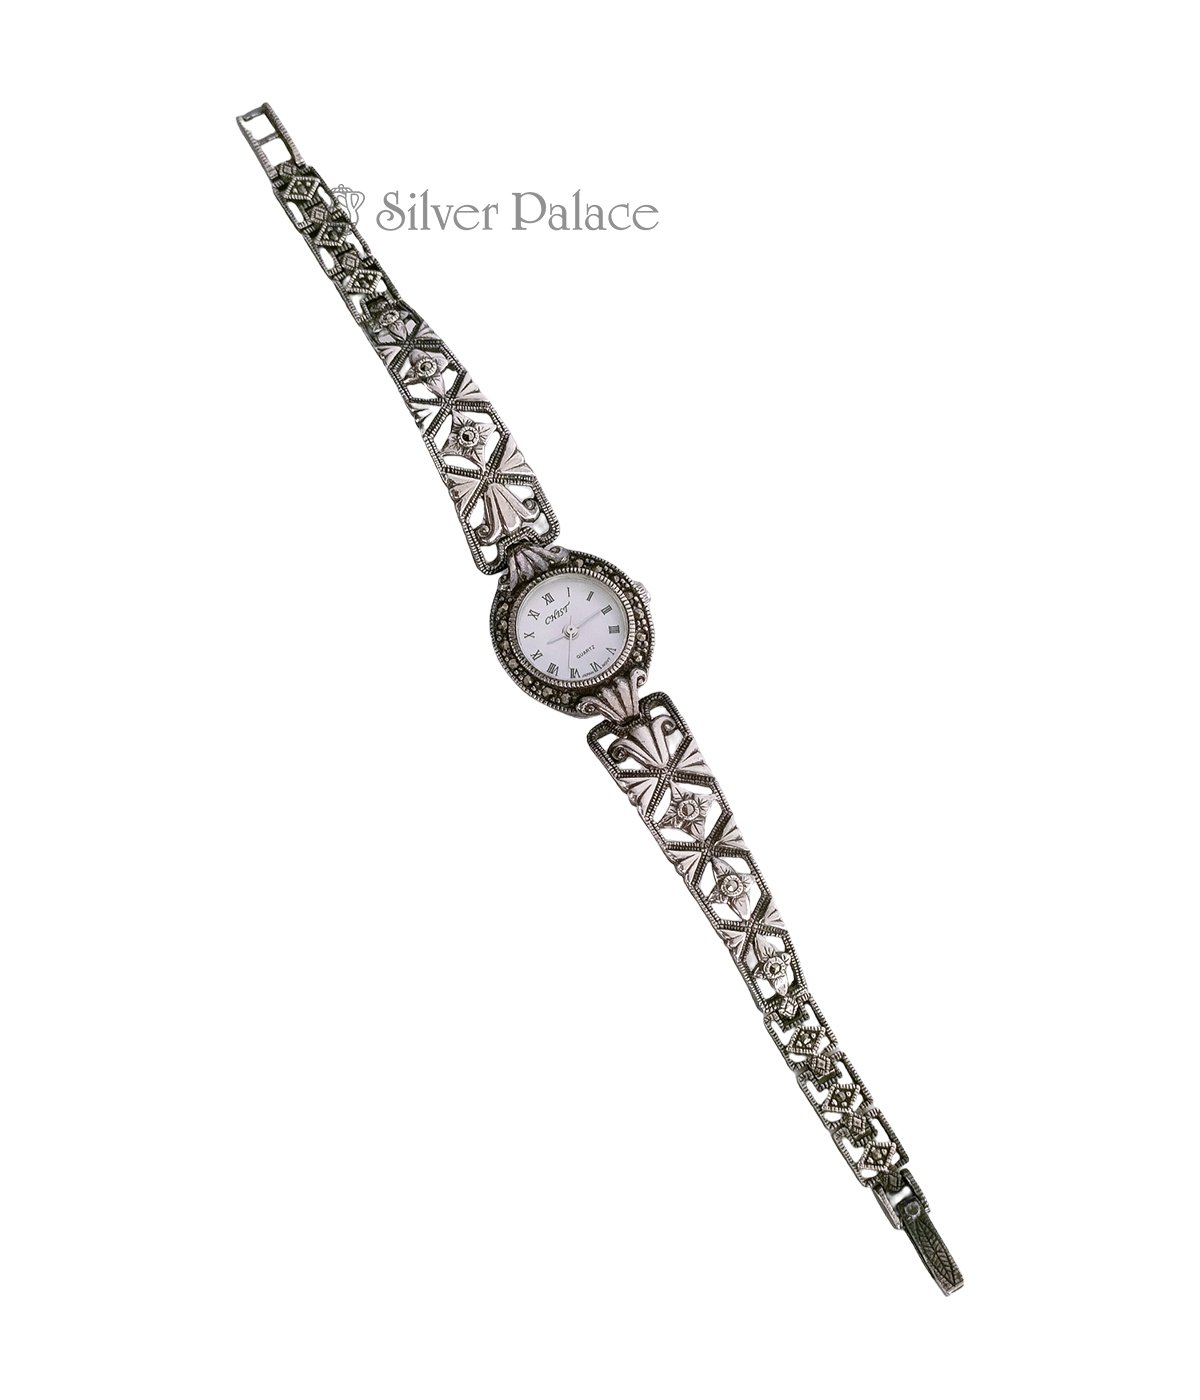 OXIDISED SILVER FLORAL DESIGN WATCHES FOR GIRLS 92.5 PURITY MARCASITE